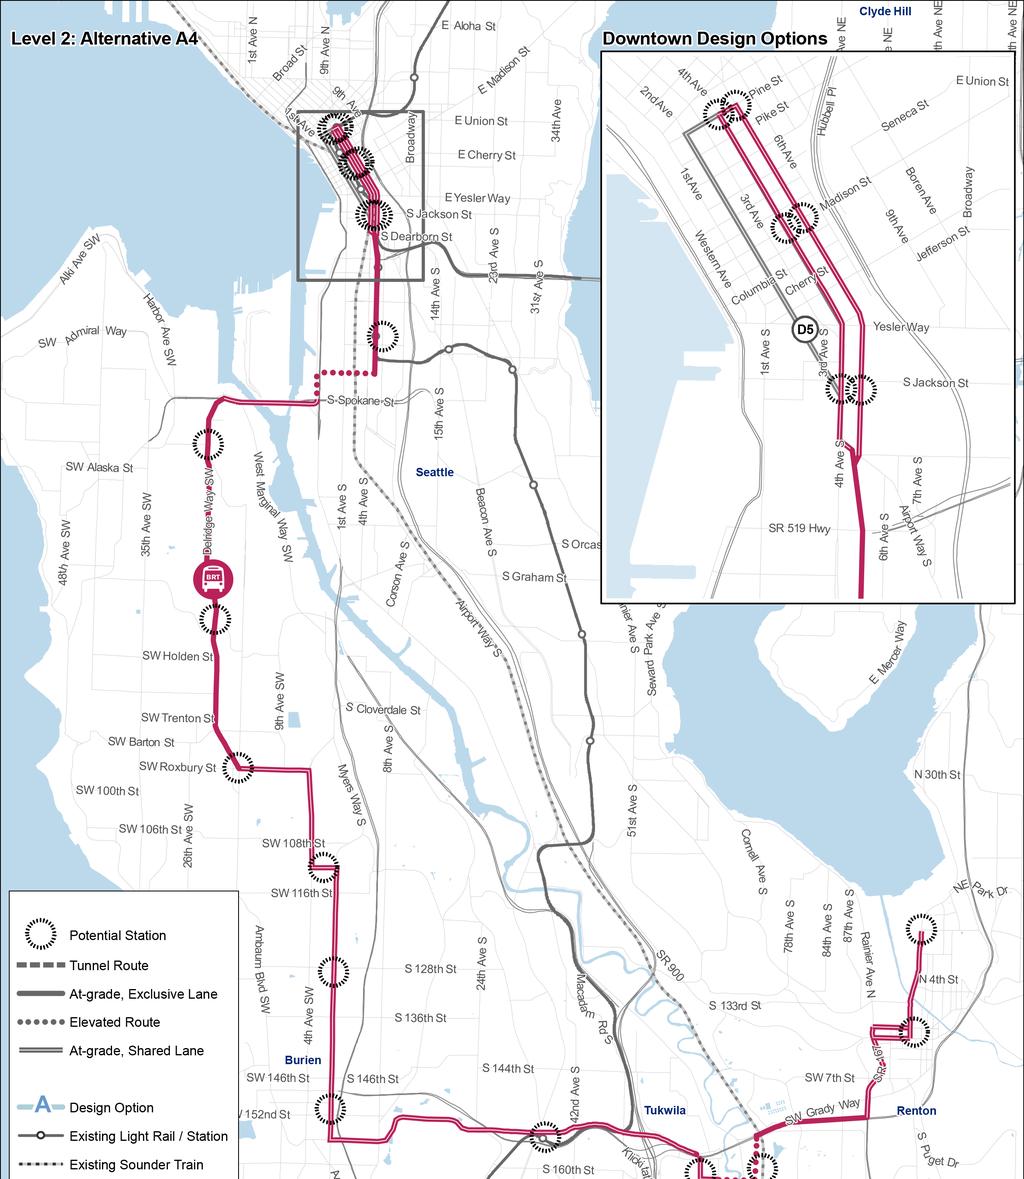 South King County High Capacity Transit Corridor Report Alternative A4 Alternative A4 is a BRT alignment that travels via a mix of at-grade and elevated profiles.